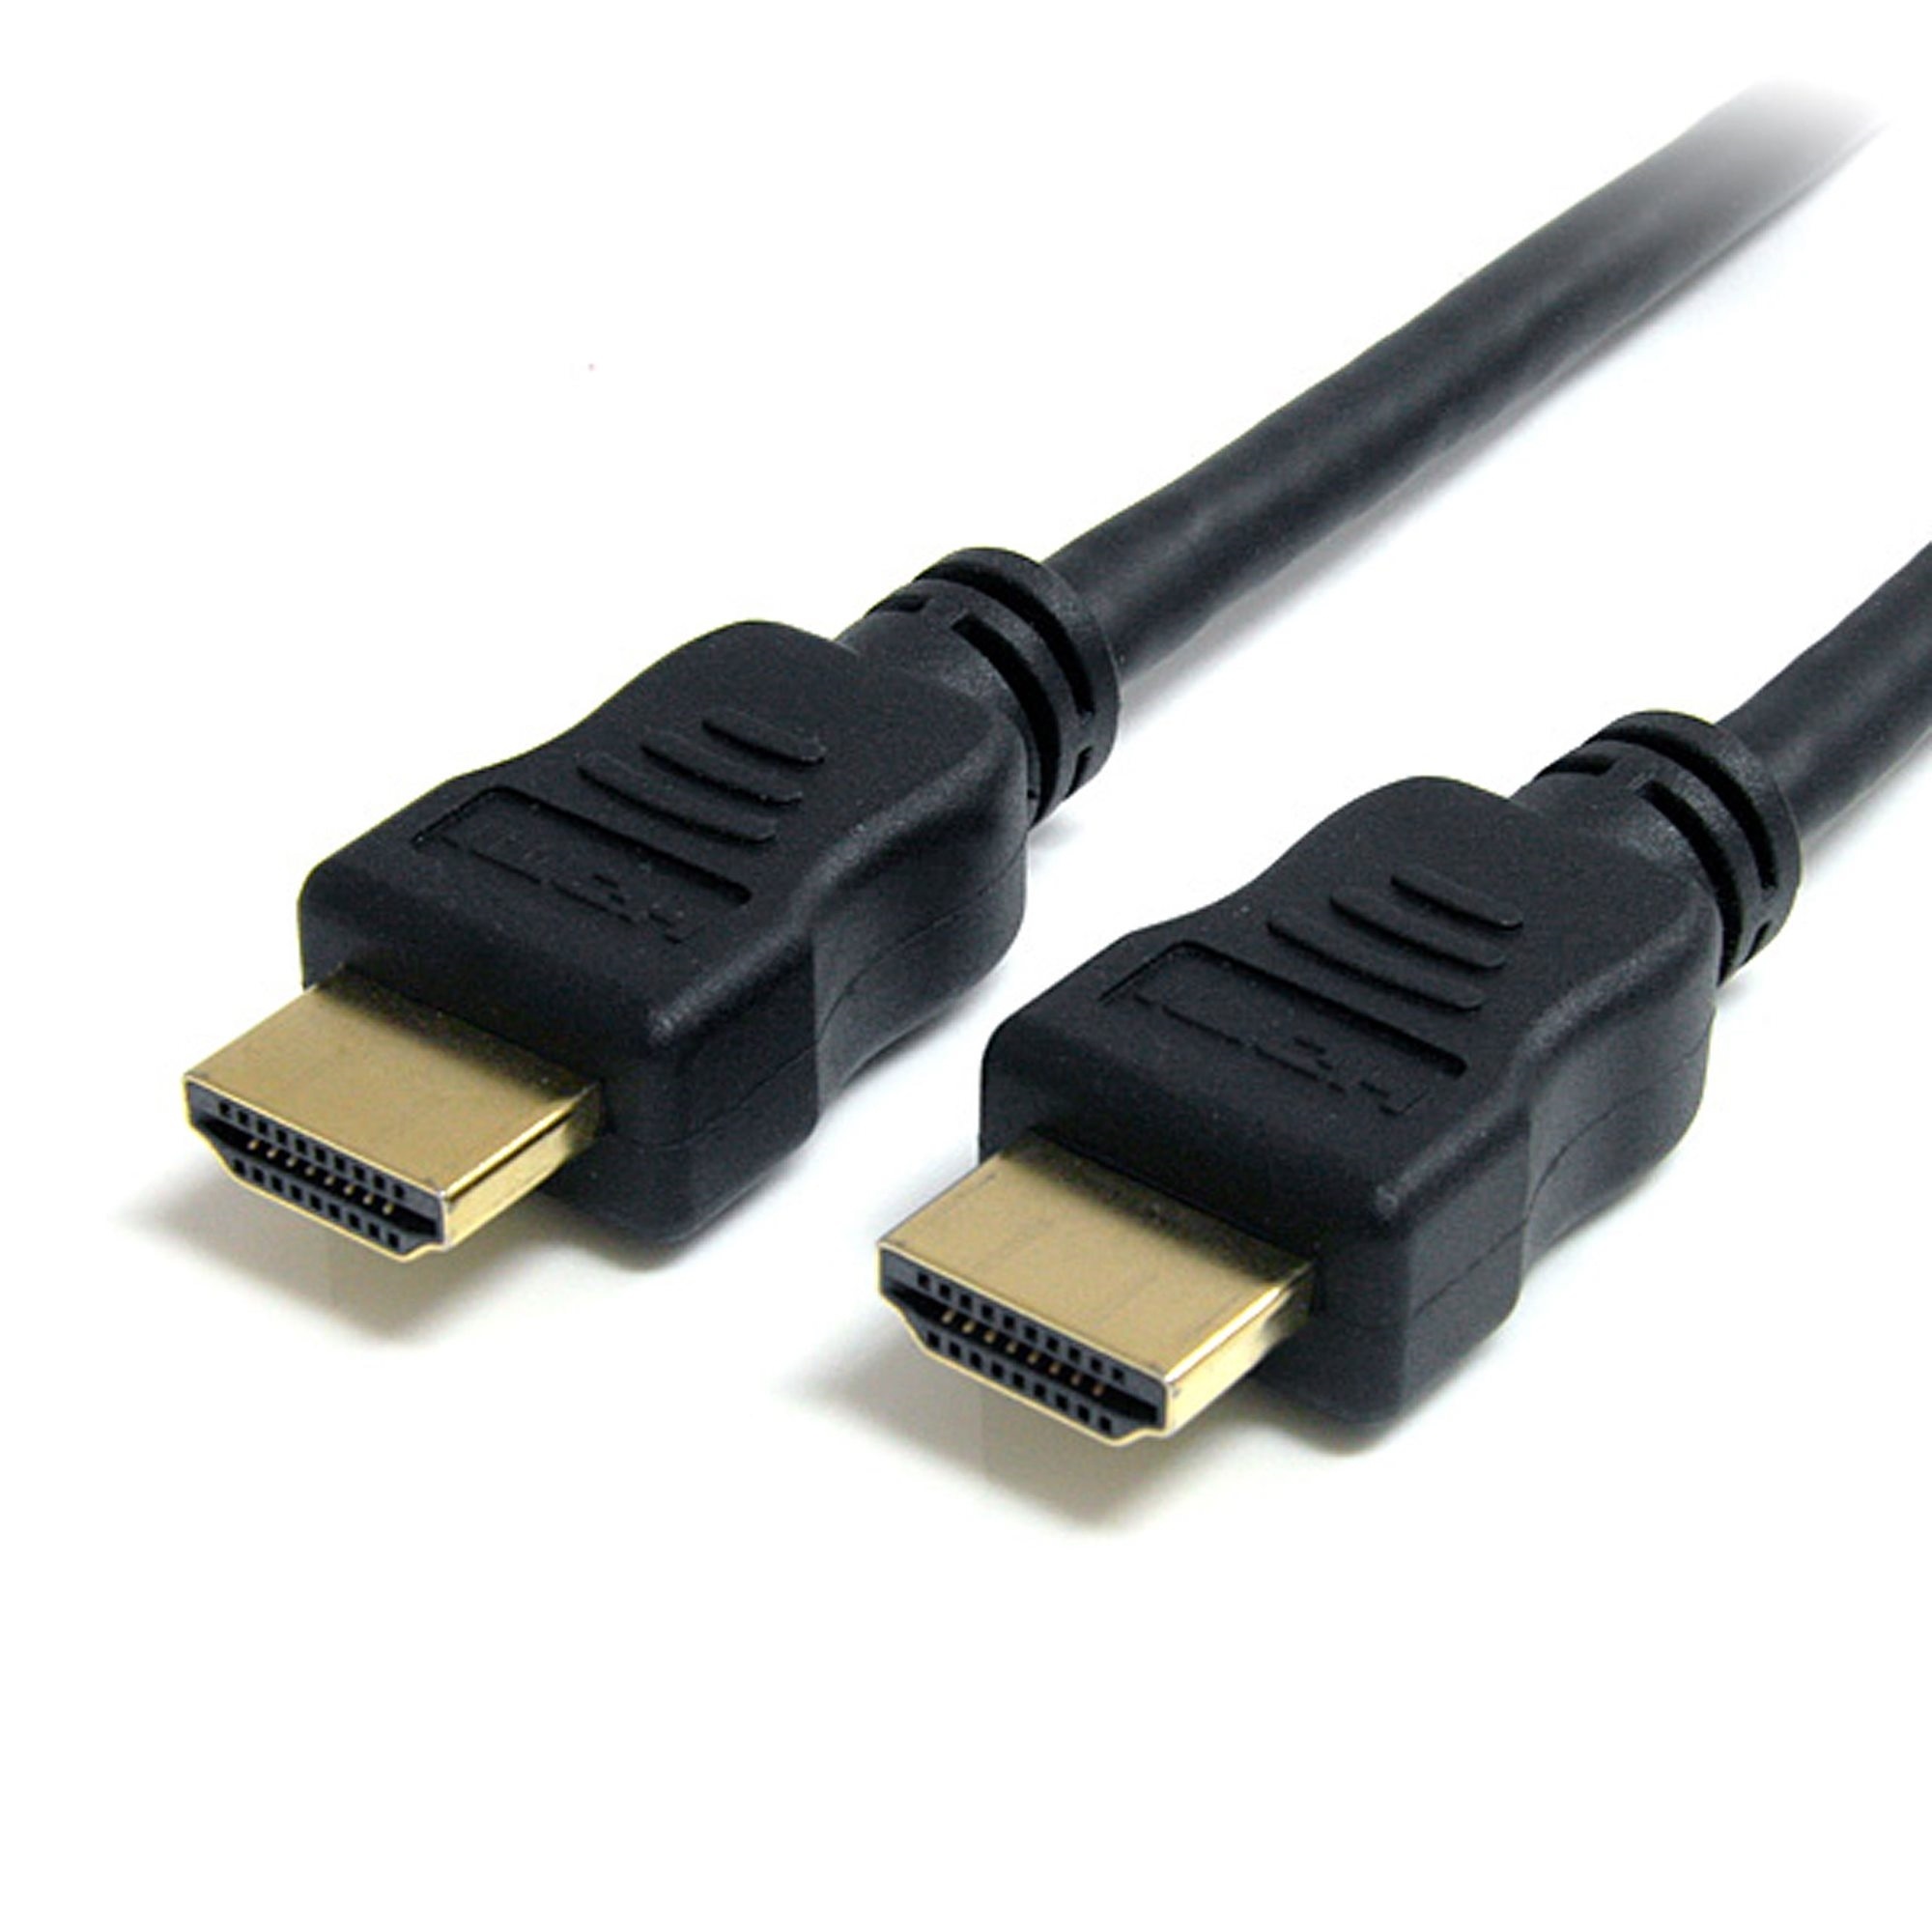 StarTech High Speed HDMI Cable w/ Ethernet (3m)